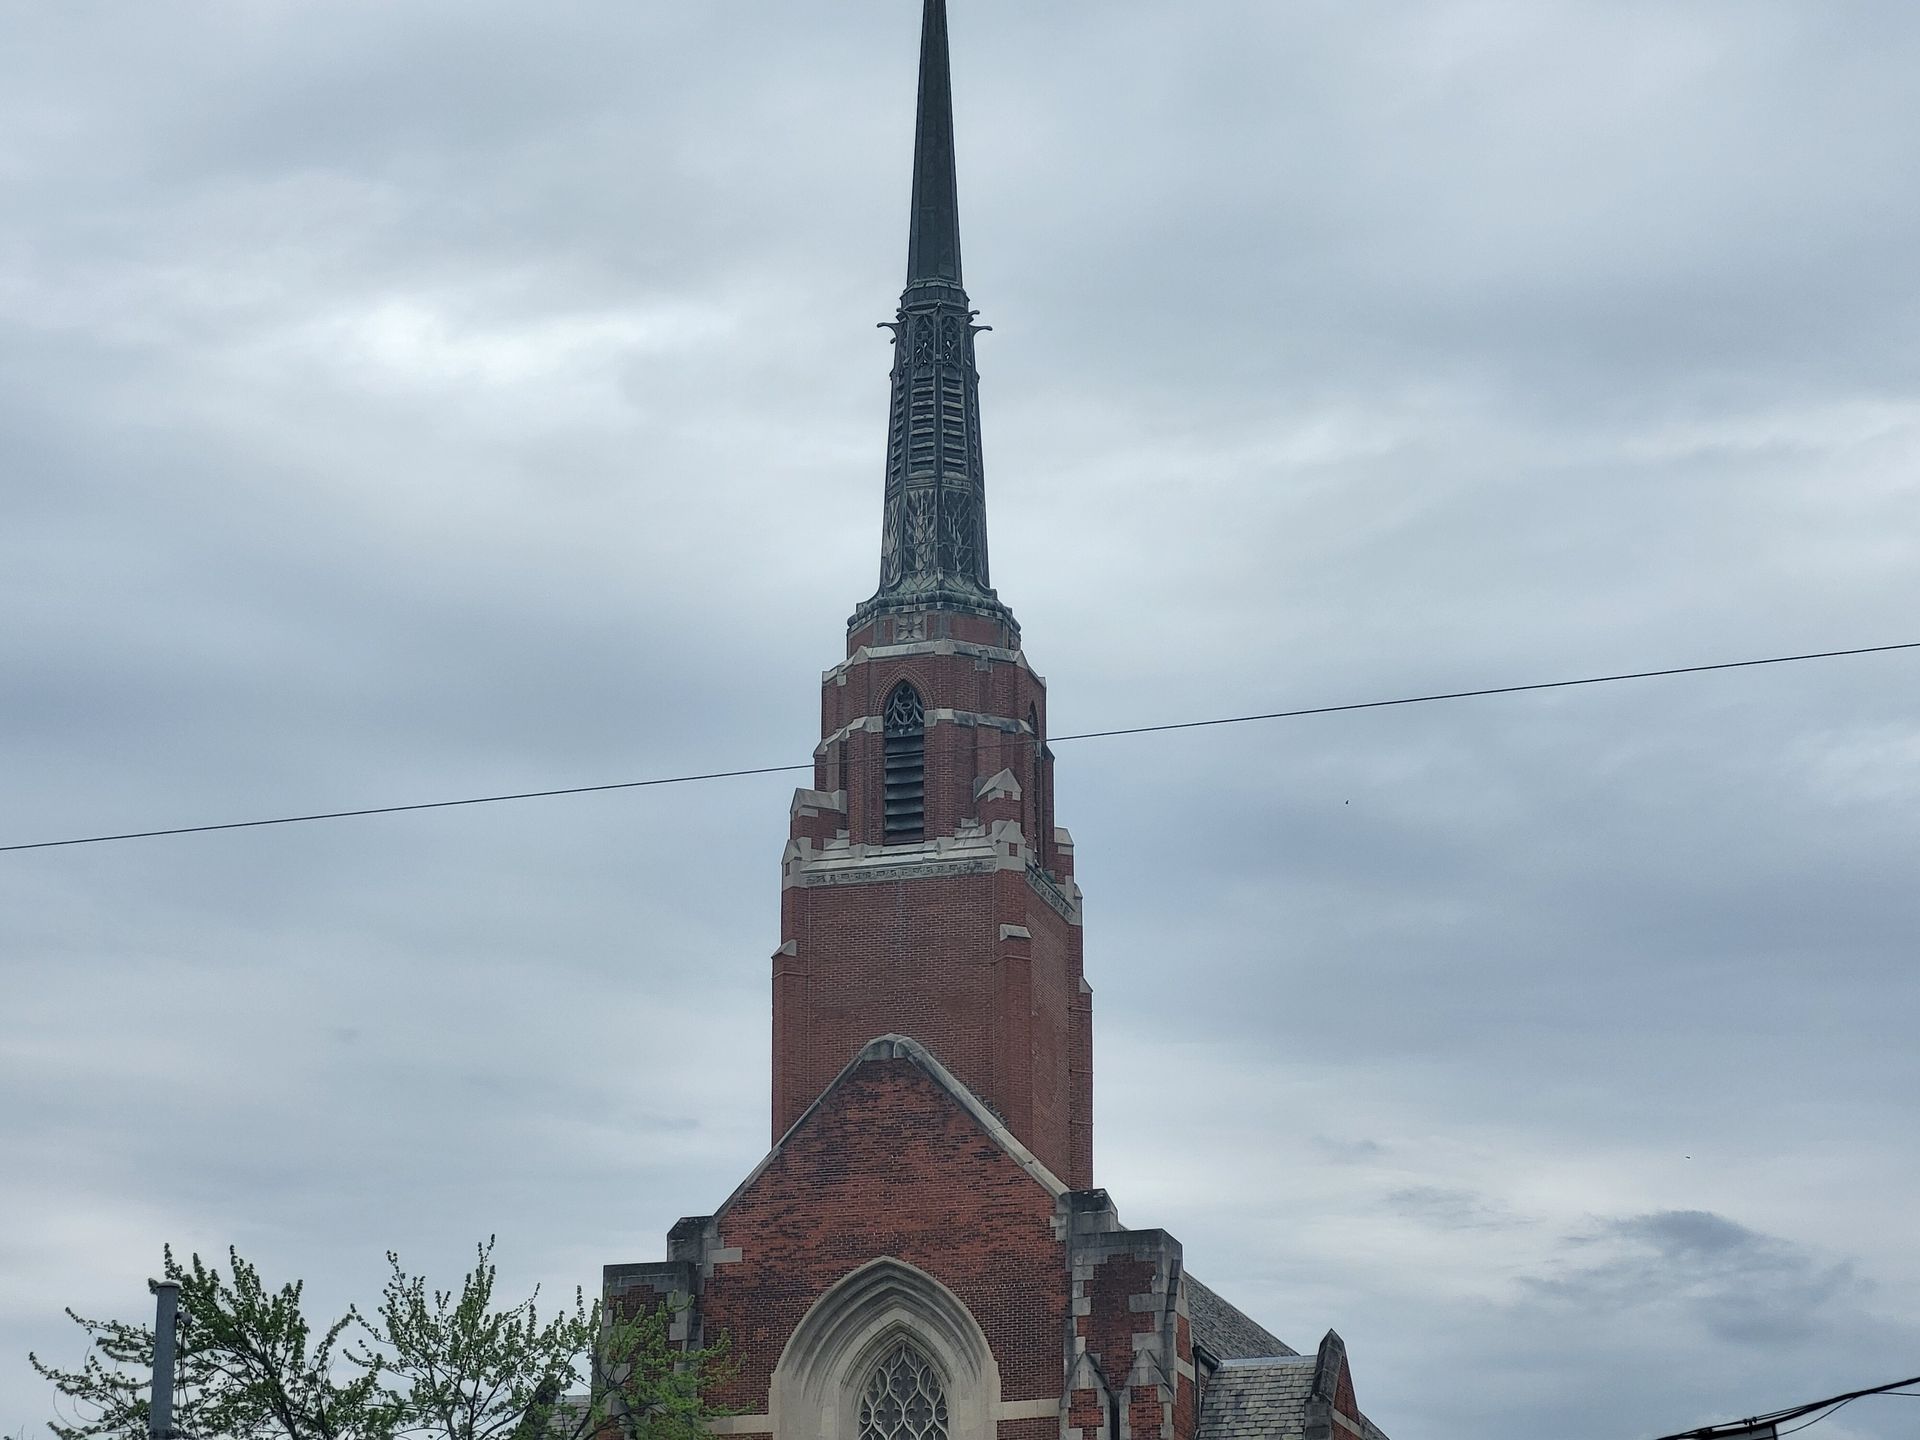 A large brick church with a steeple against a cloudy sky